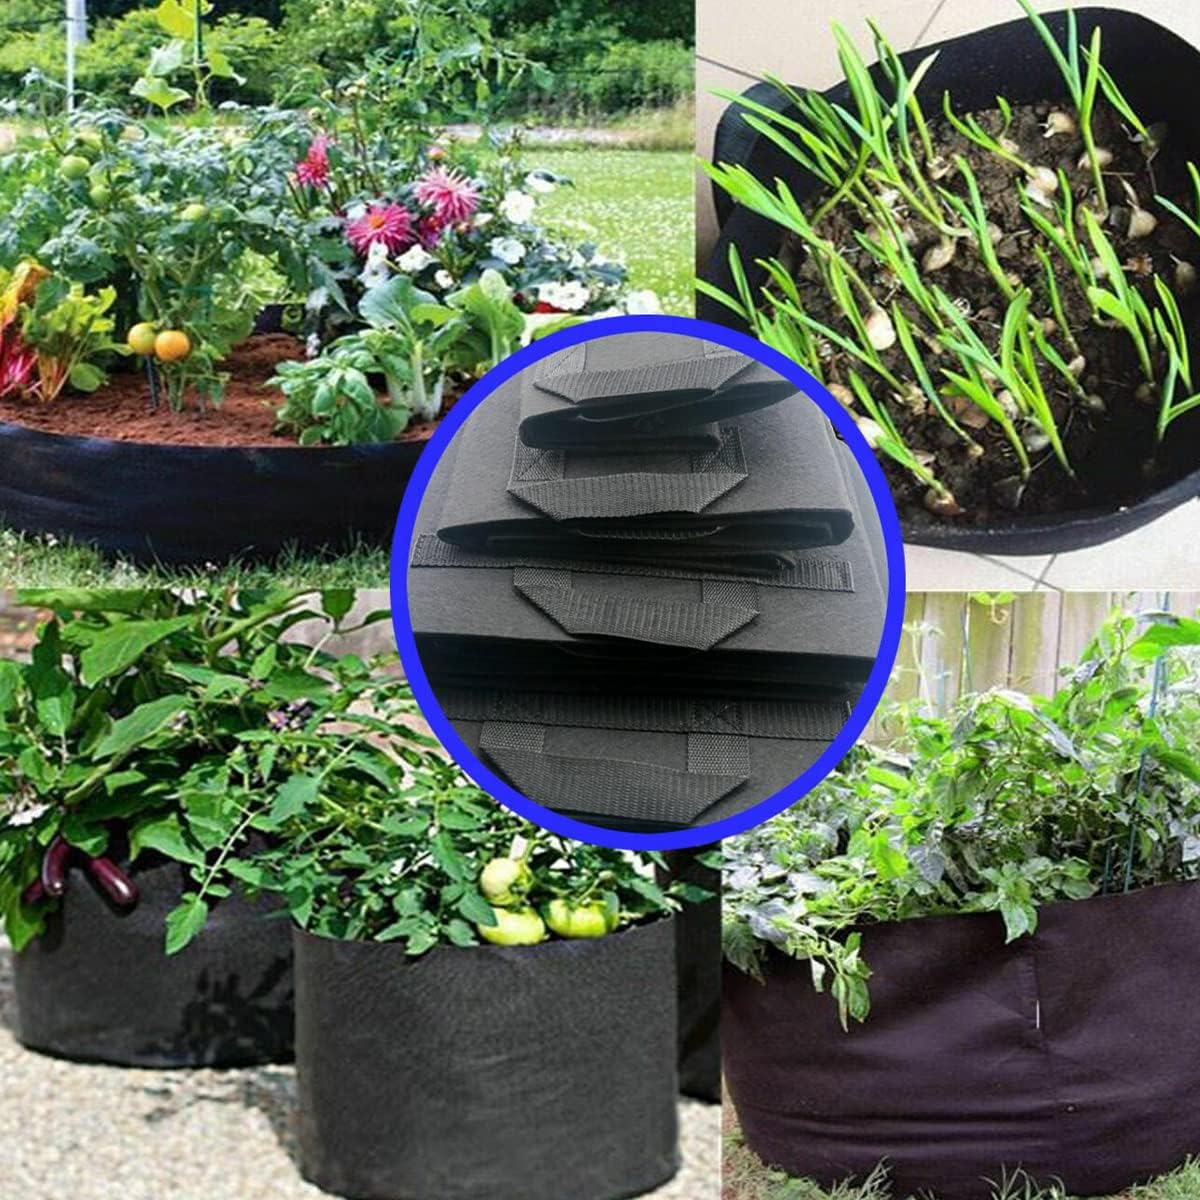 24 Pack 5 Gallon Grow Bags,Fabric Pots 5 Gallon,Premium Grow Bags 5 Gallon for Healthy Plant Growth